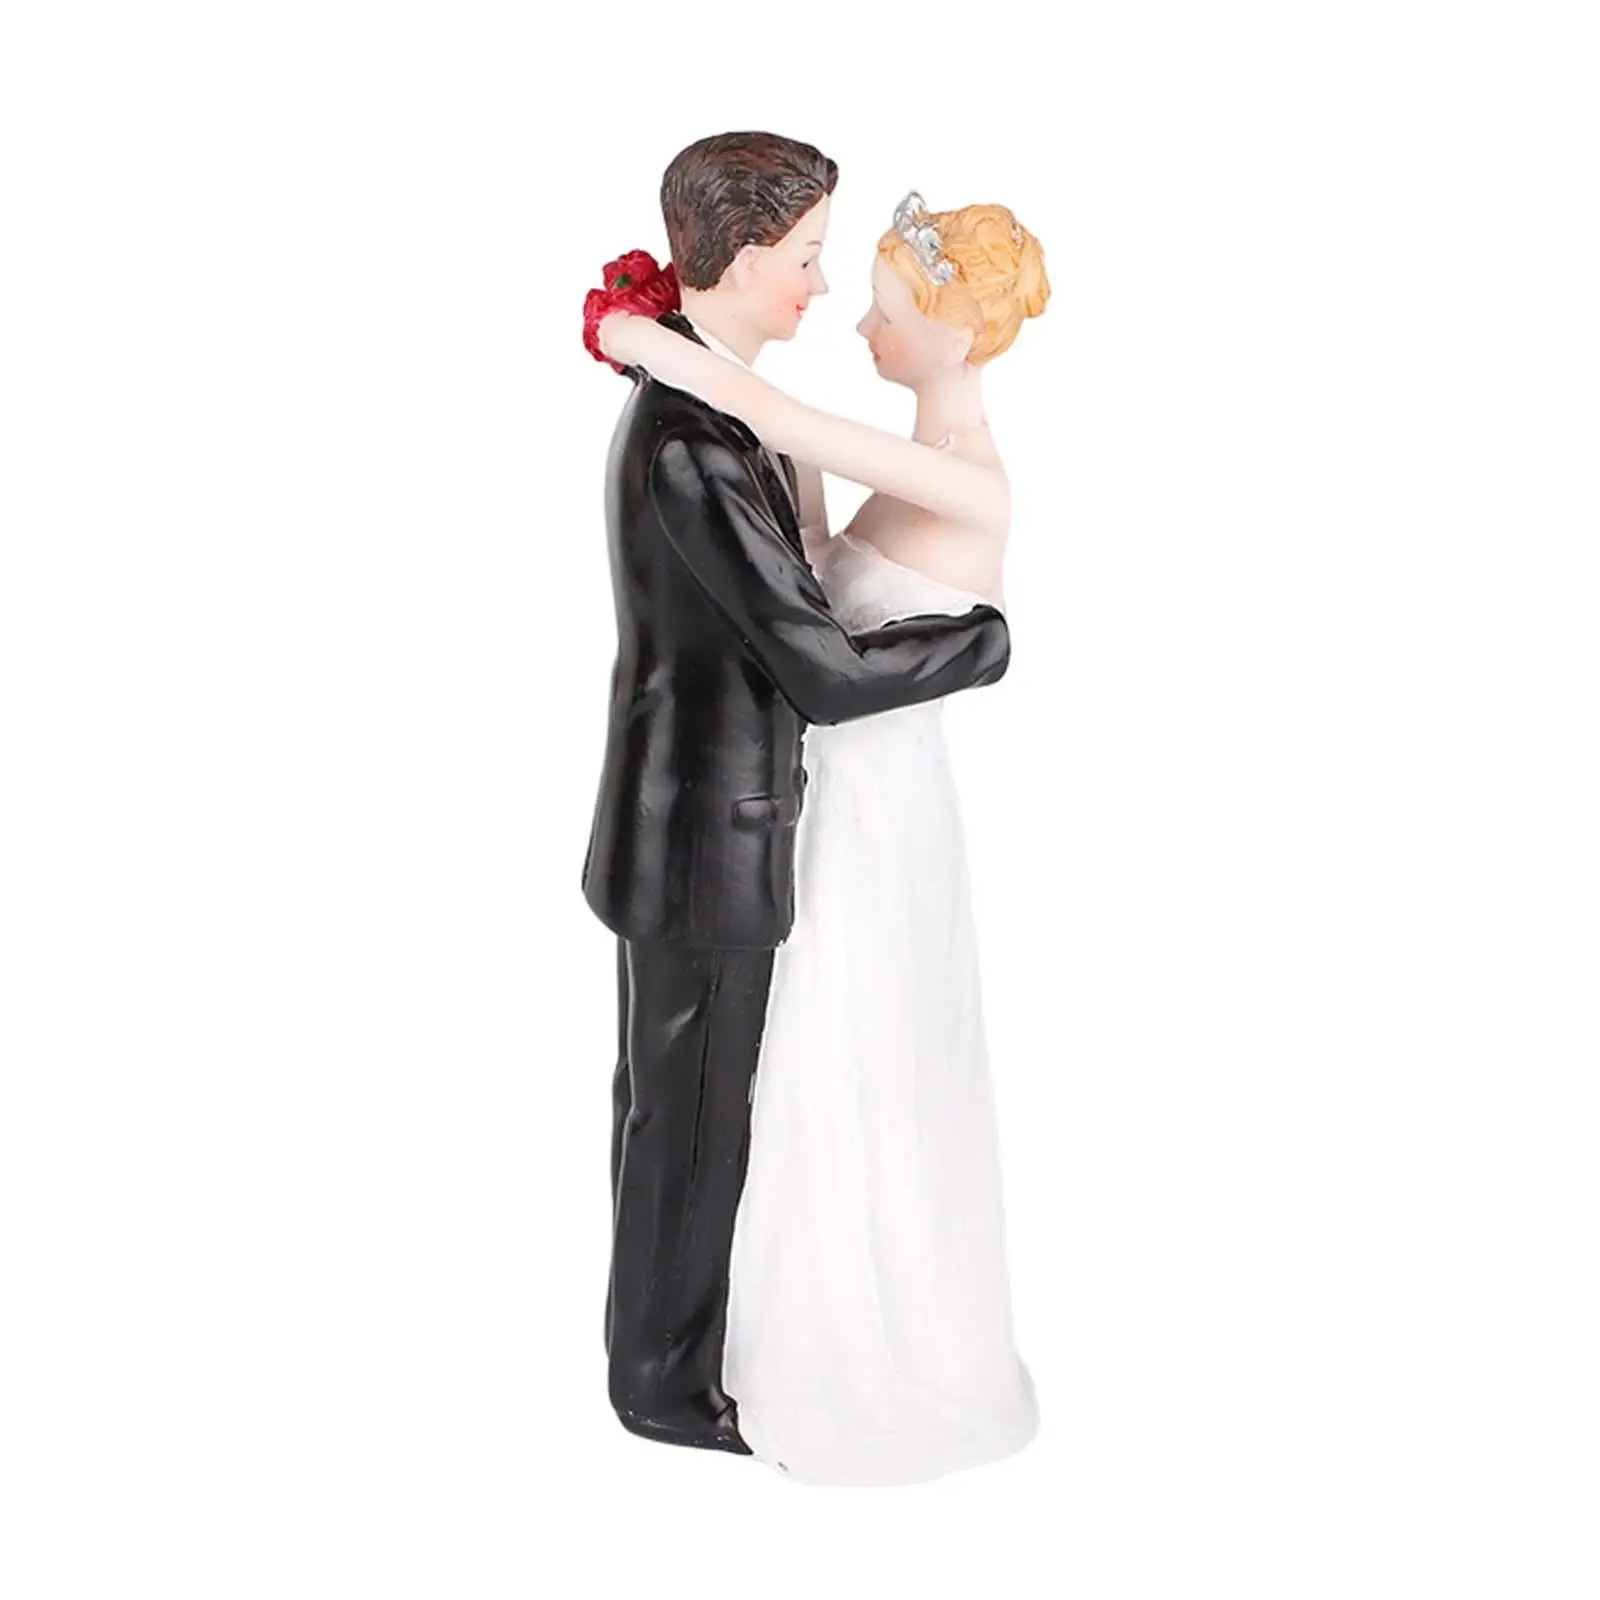 Funny Couple Statue 1Pcs Wedding Cake Topper for Engagement Showers